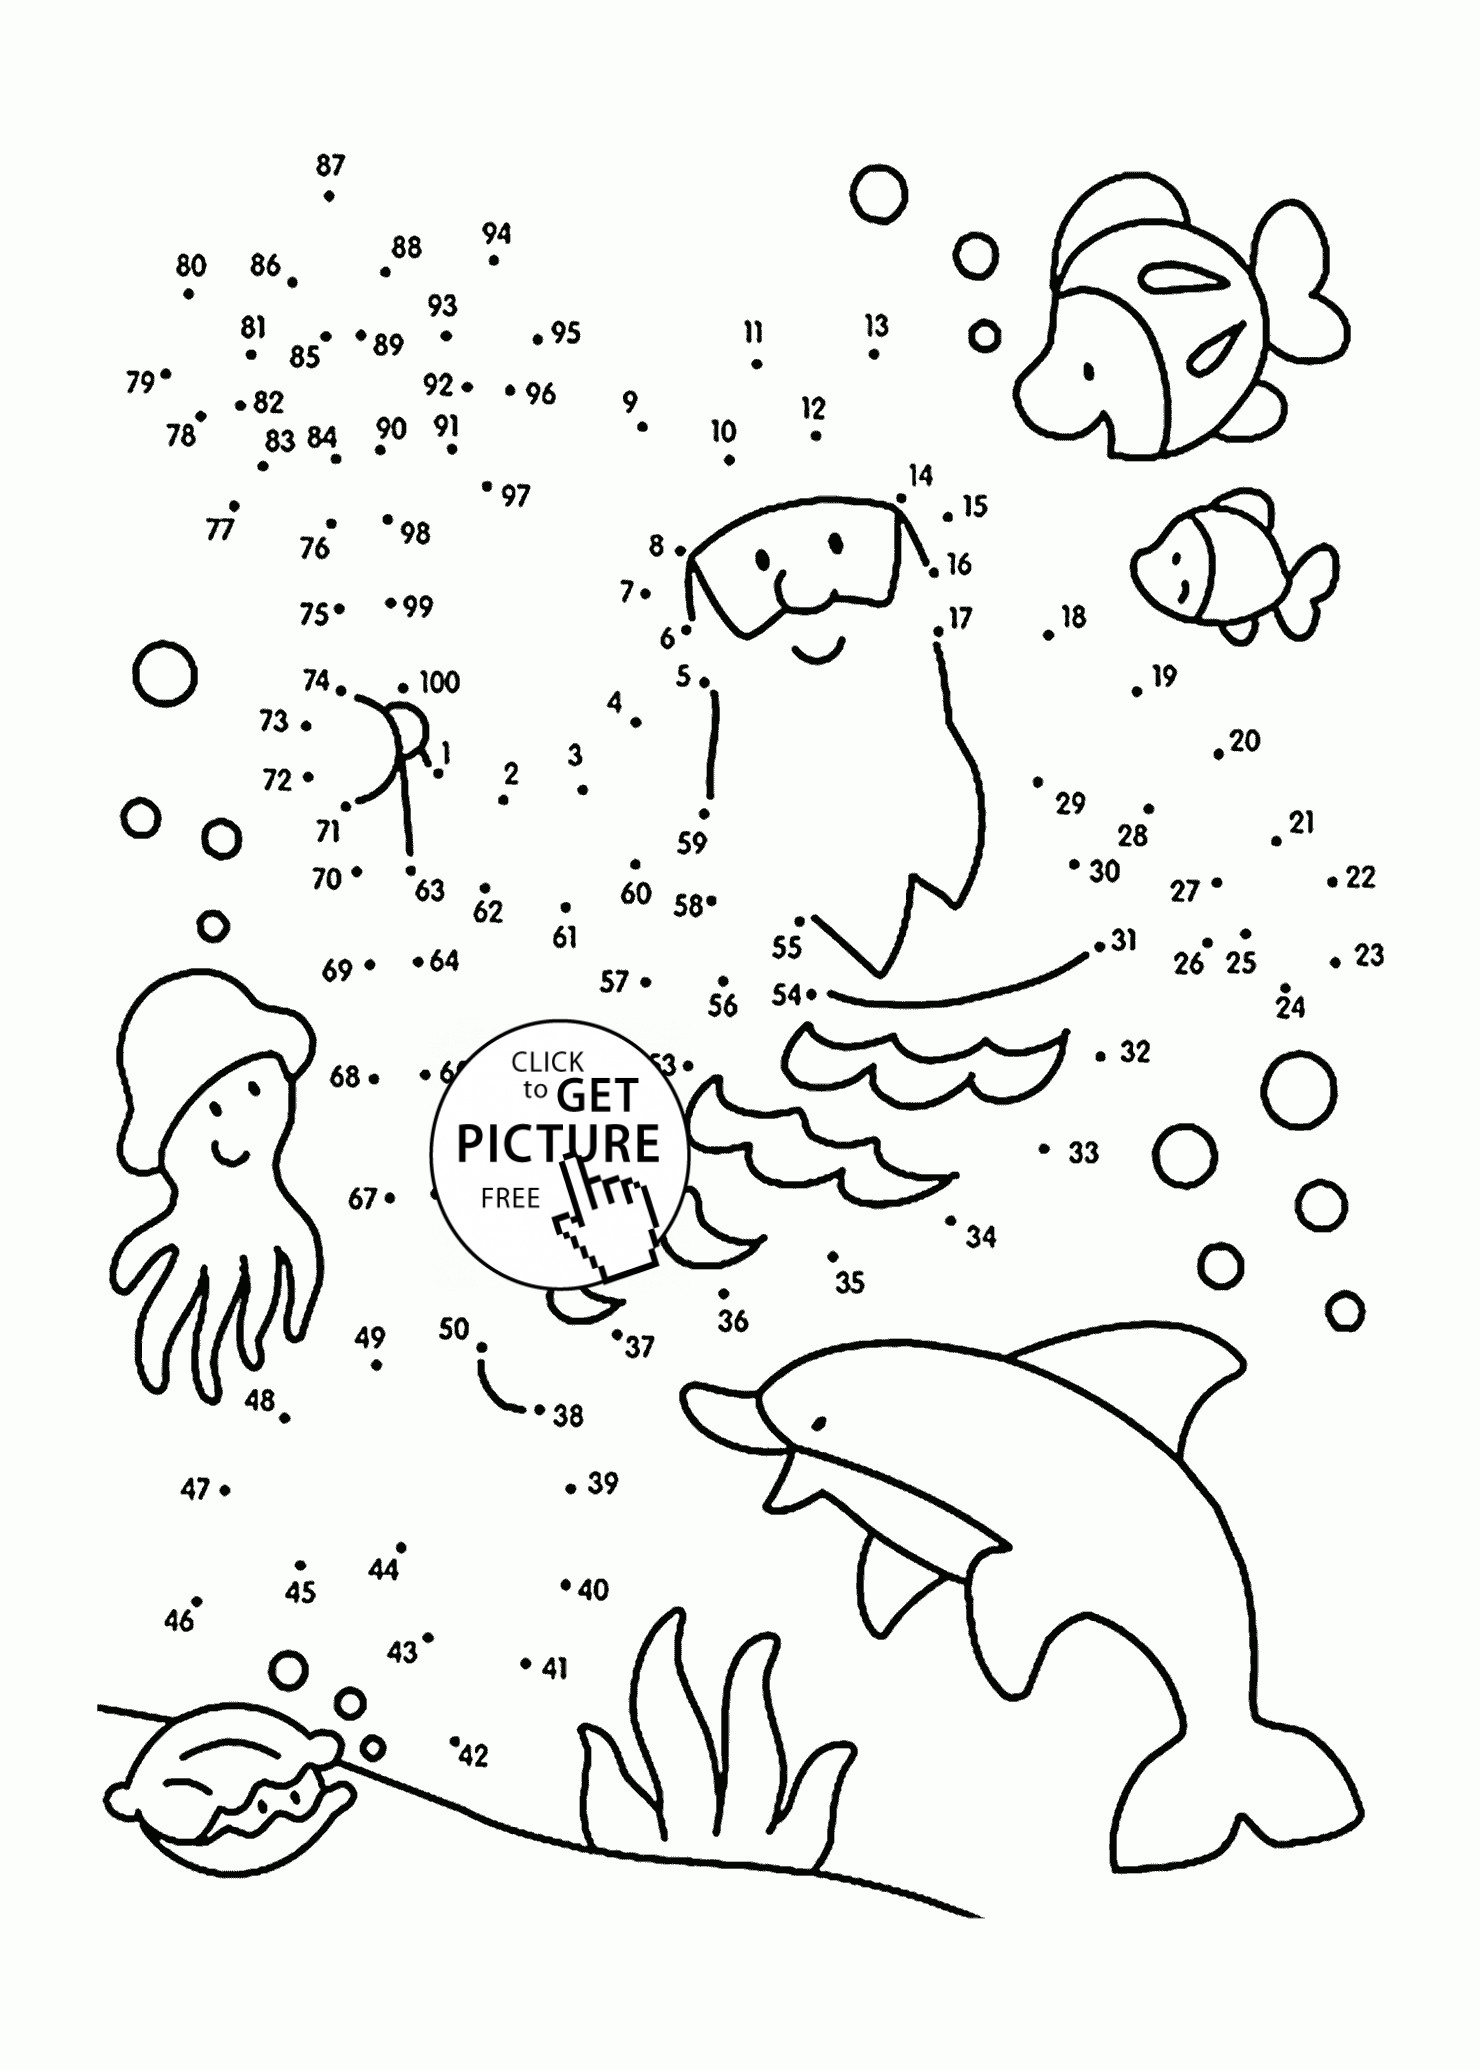 Boys Dot To Dot Coloring Pages
 Undersea Dot to Dot coloring pages for kids connect the